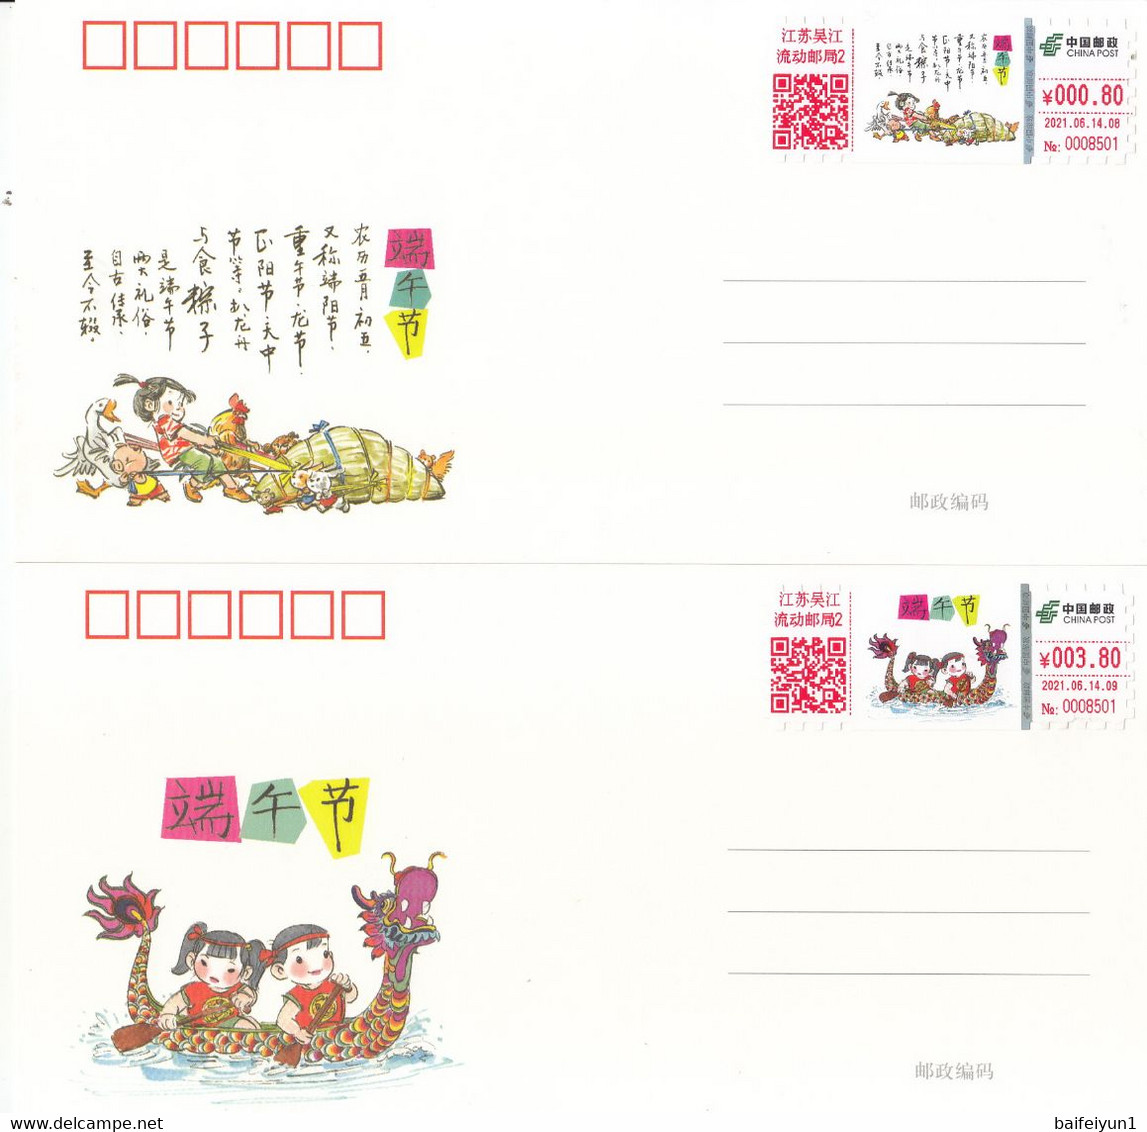 China 2021 The Dragon Boat Festival  ATM Label Stamps Commemorative Covers(4v) AND Cards(2v) - Postales